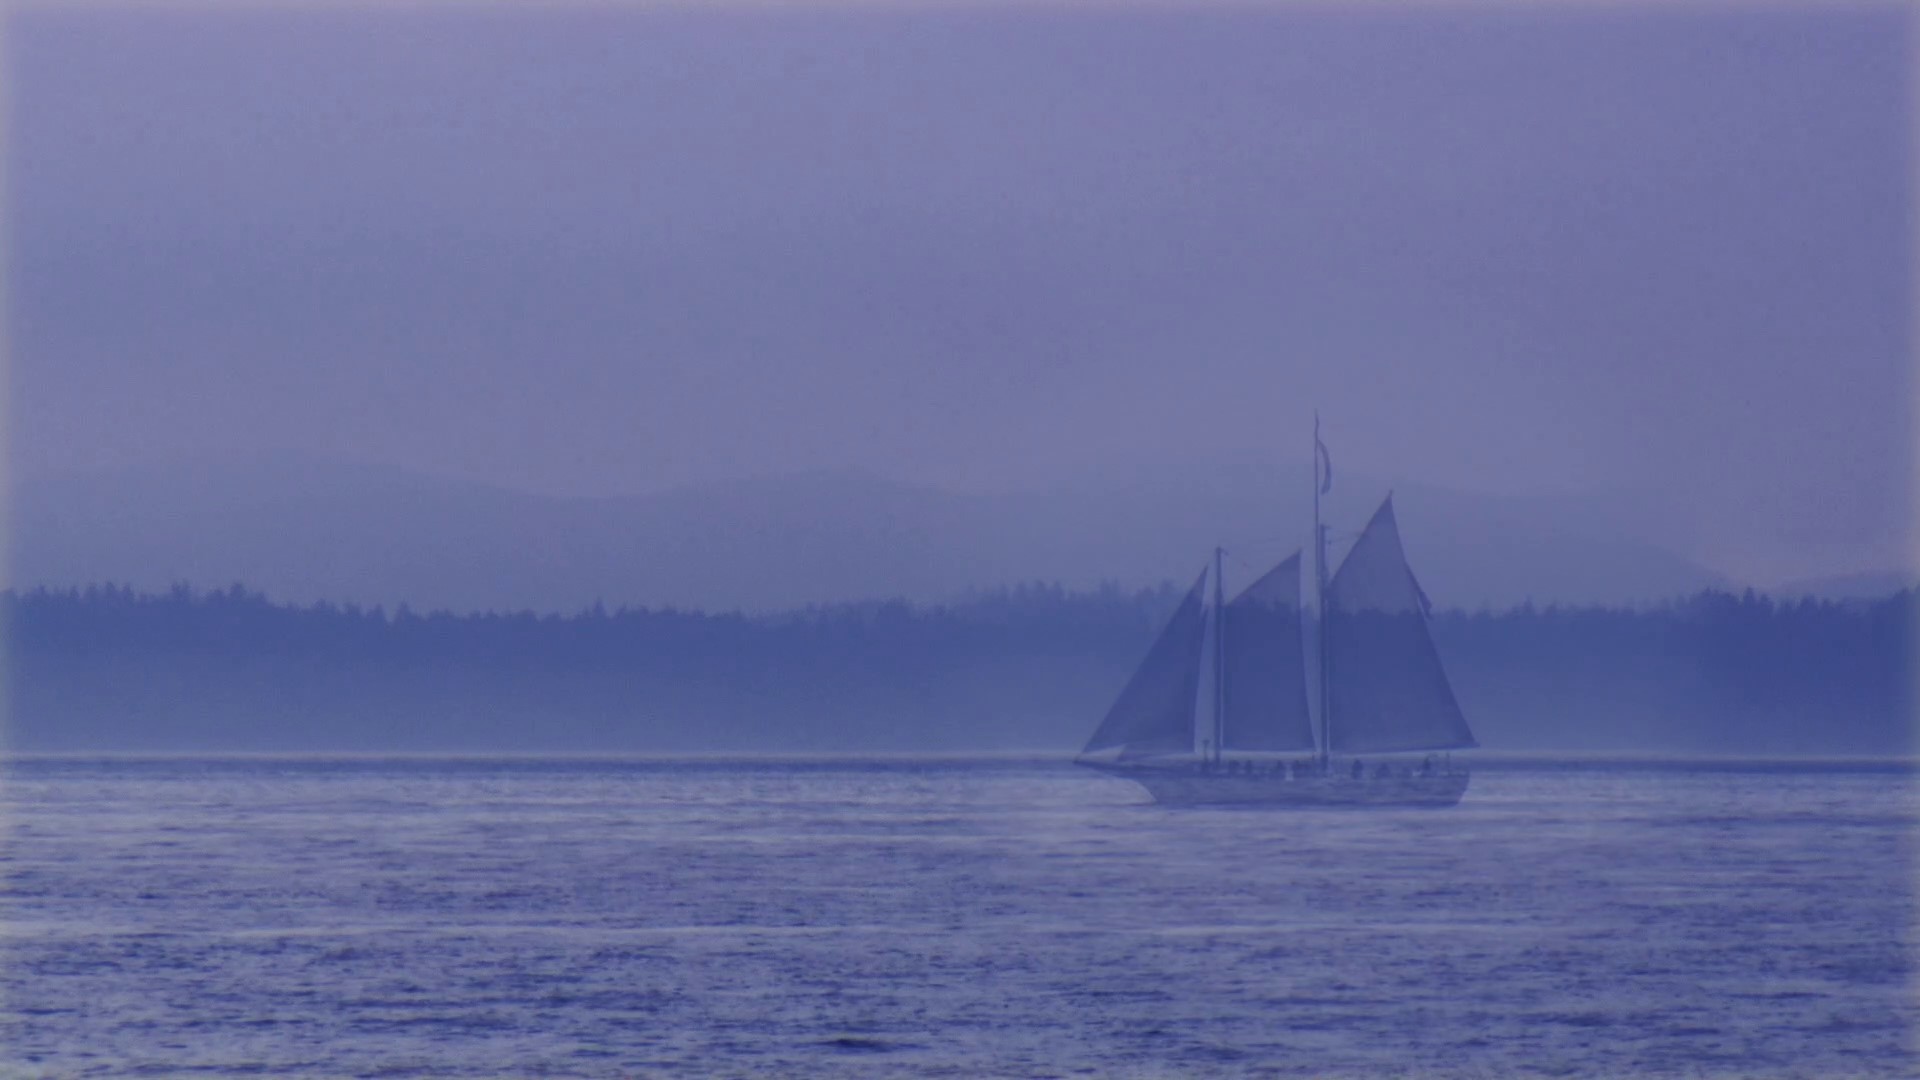 New ghost guide shares the PNW's spookiest spots. #k5evening